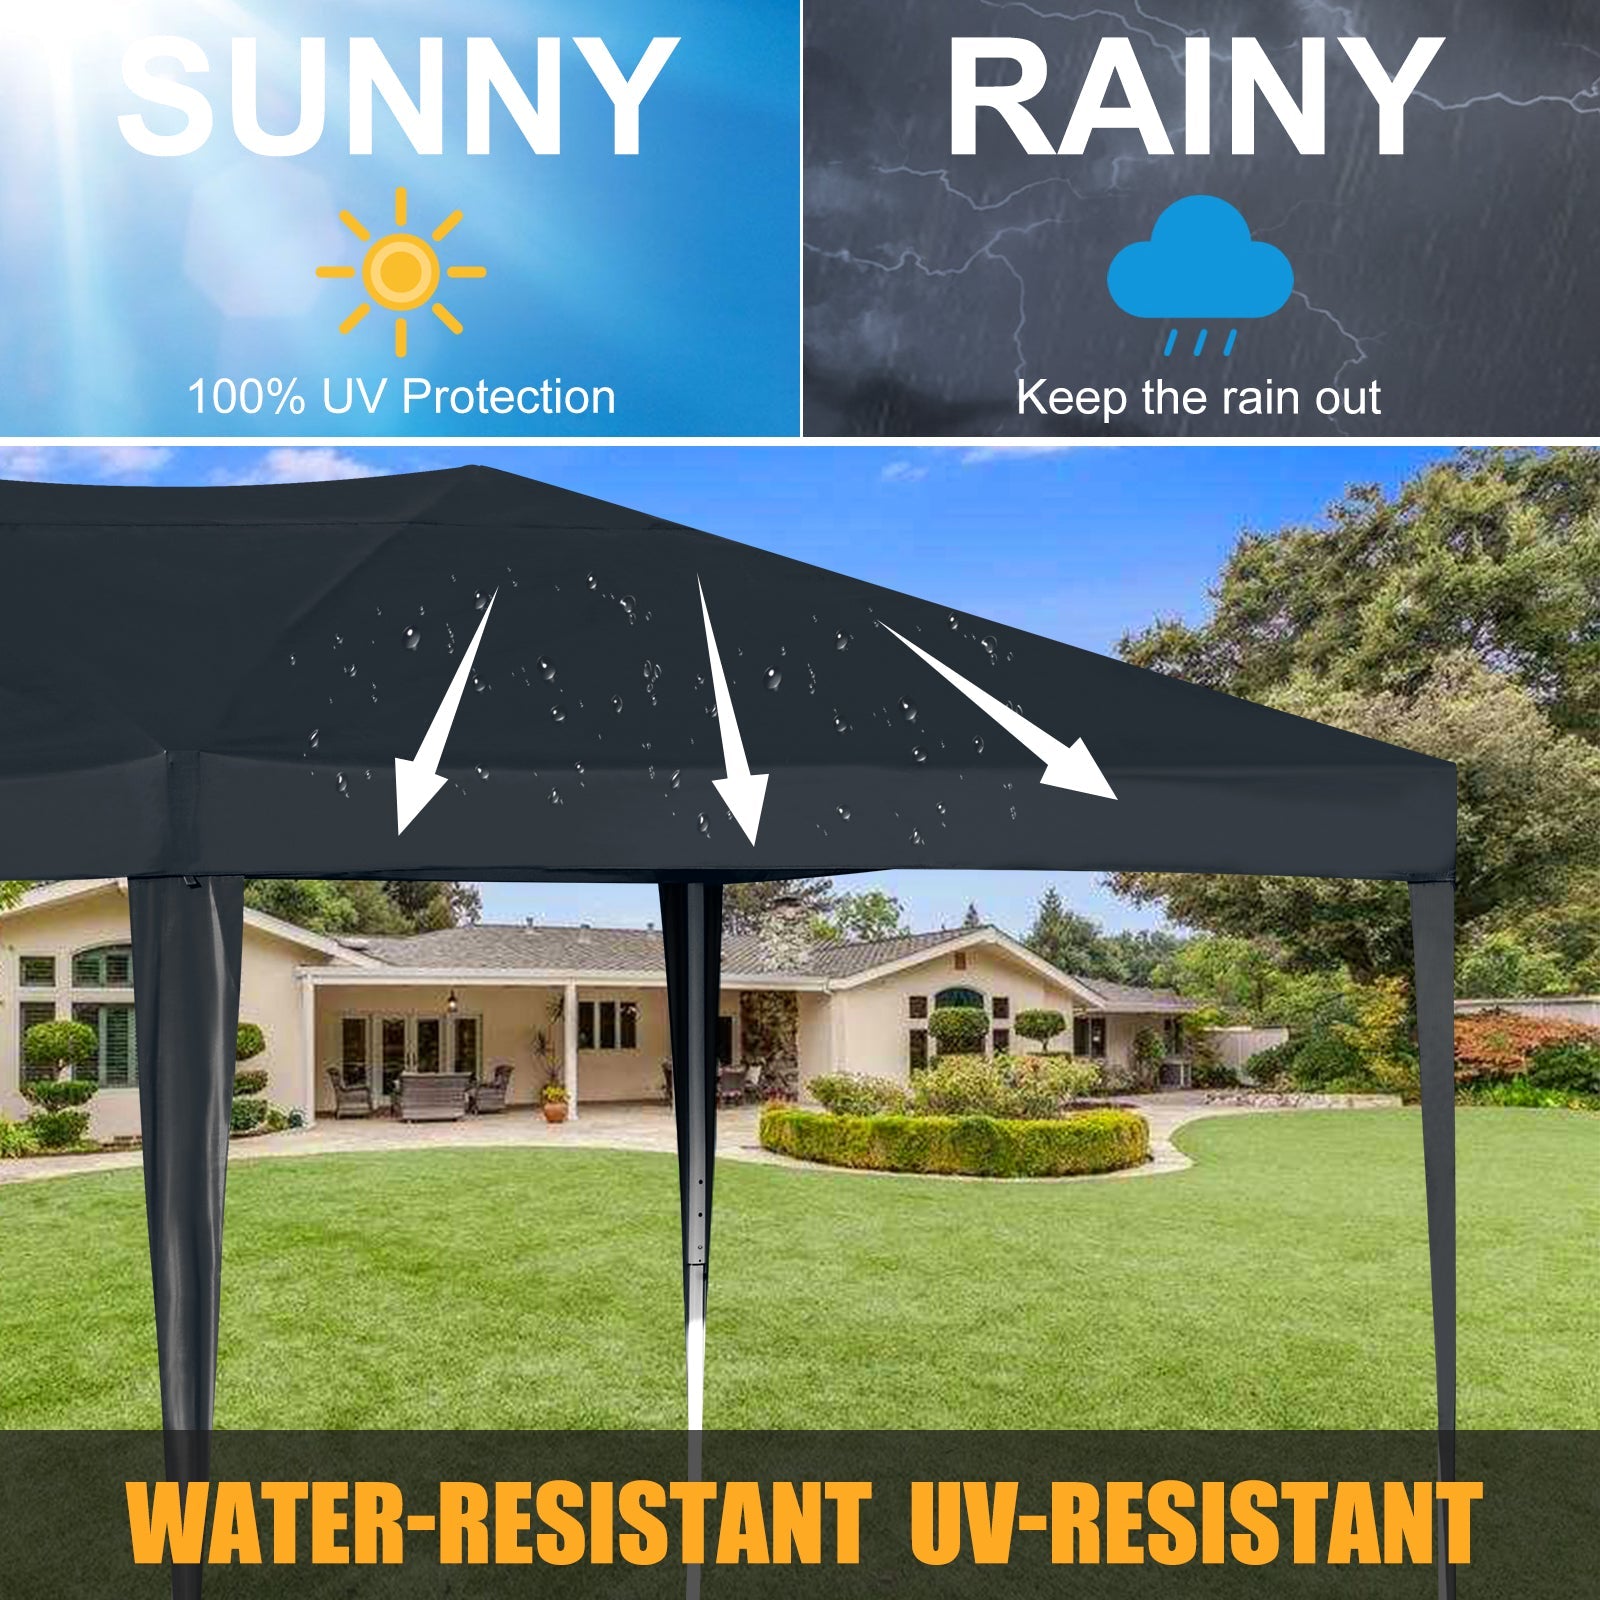 AVAWING 10 x 20 Pop Up Canopy with Sturdy Frame, Folding Patio Canopies Height Adjustable, Anti-UV & Waterproof Outdoor Canopy Tent with Portable Carry Bag for Parties, Commercial